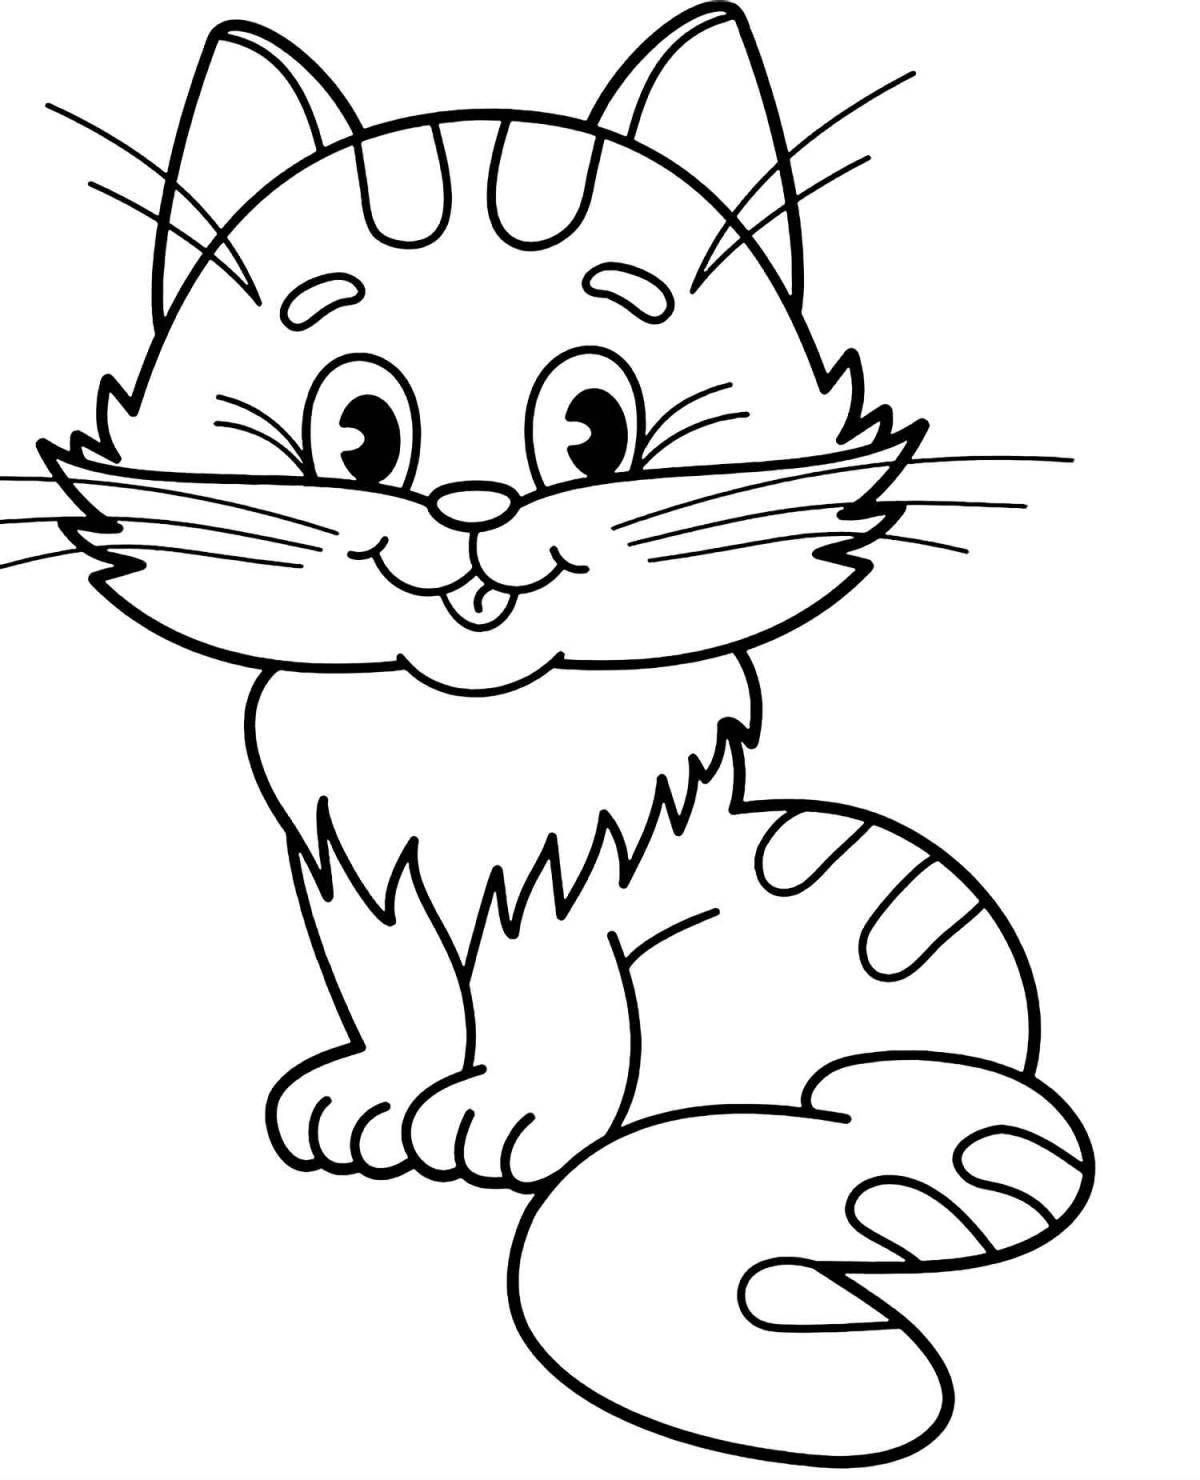 Colorful kitty coloring book for 2-3 year olds